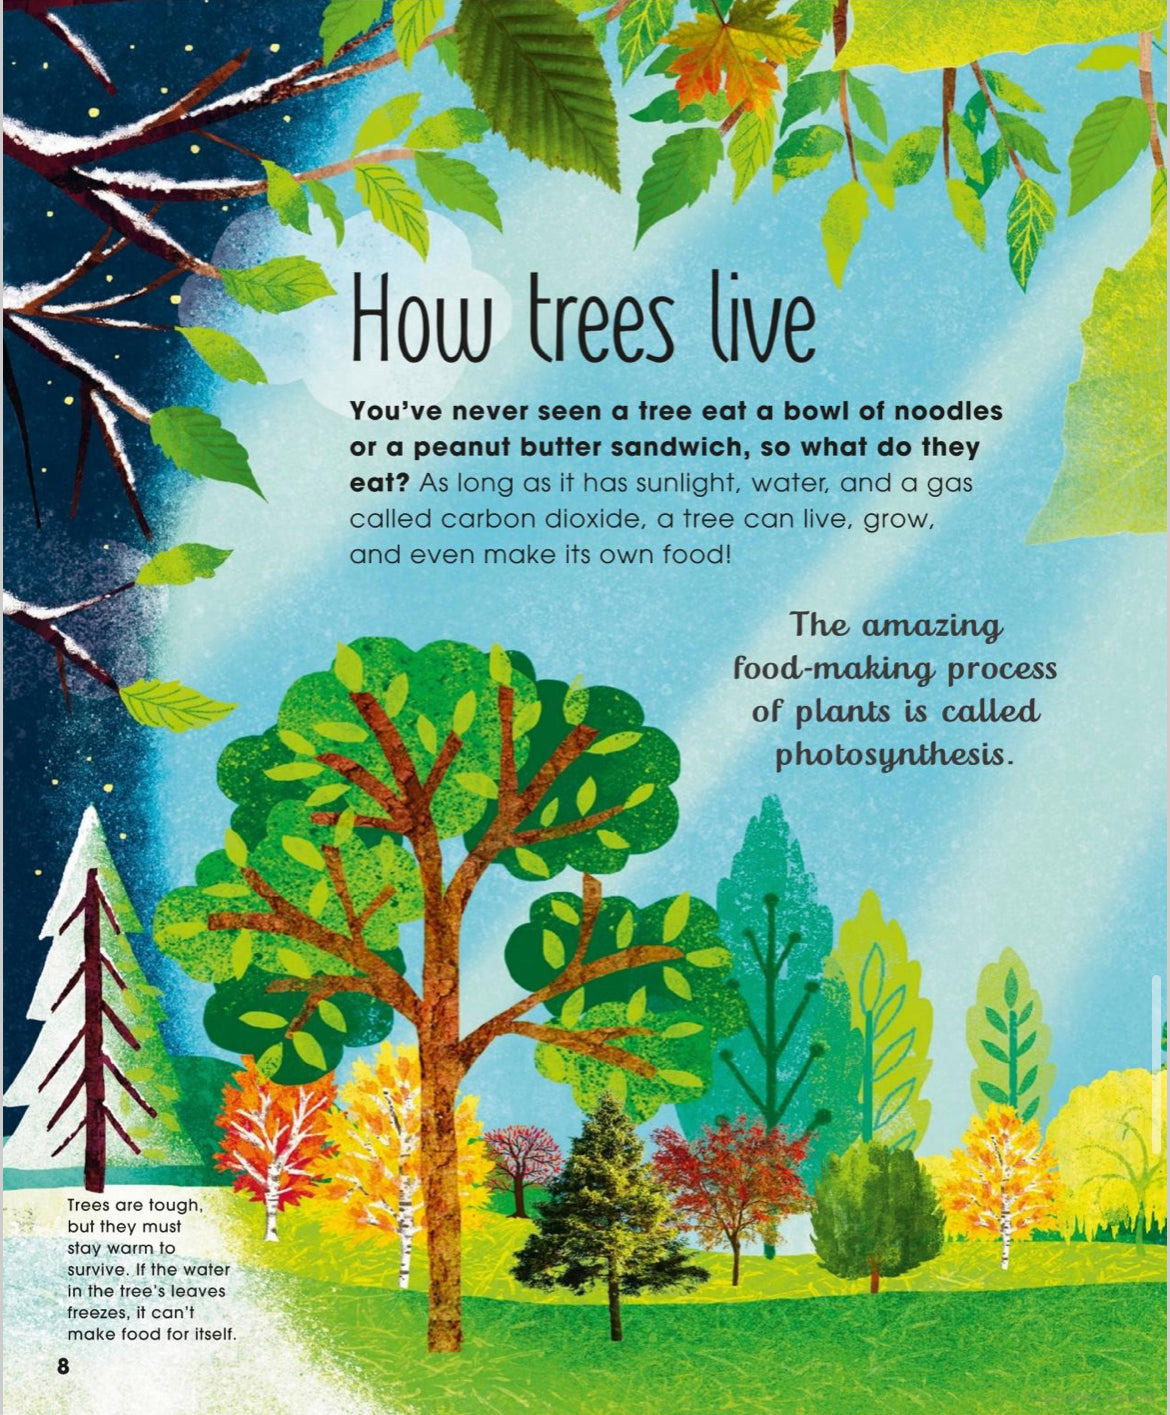 The Magic and Mystery of Trees - Tree Science for Kids - Alder & Alouette